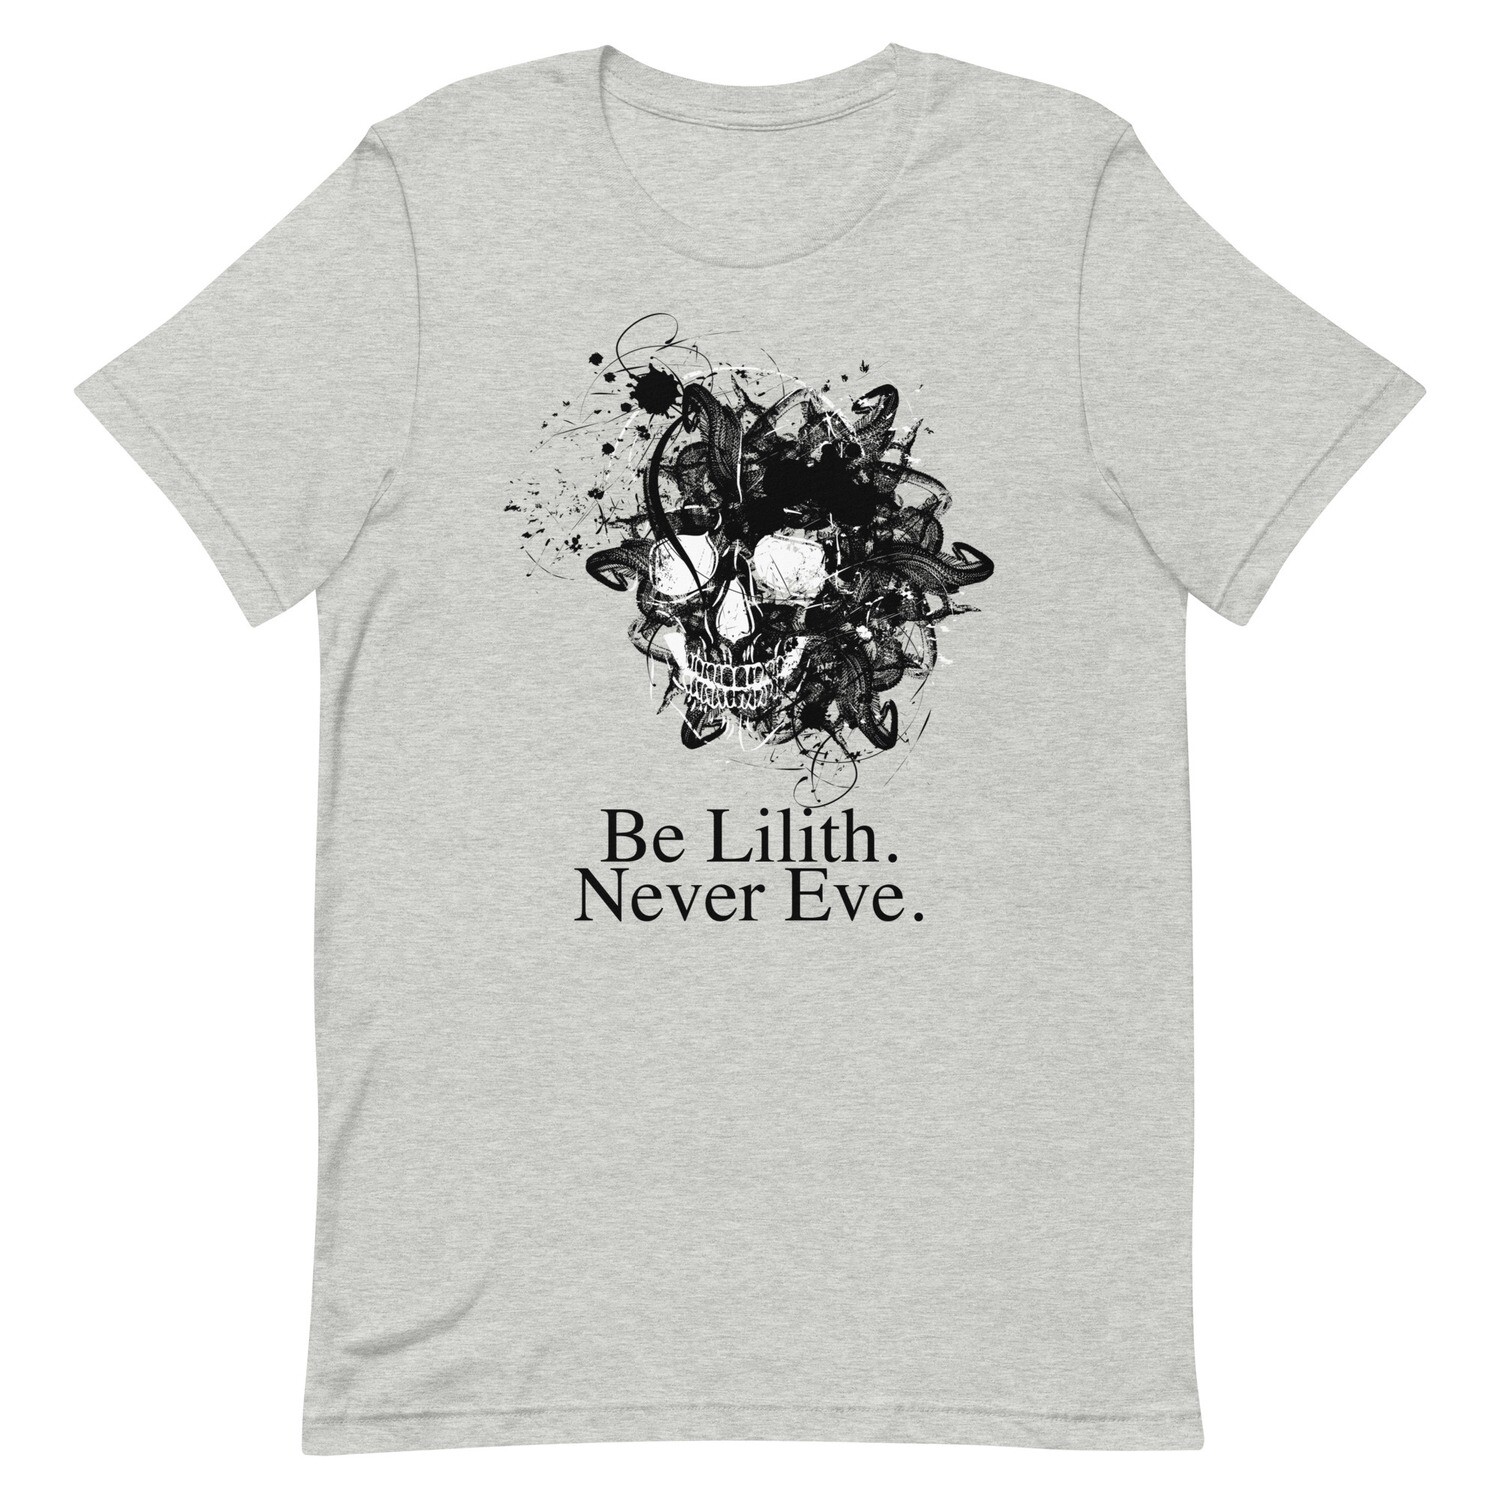 Be Lilith. Never Eve. Unisex t-shirt